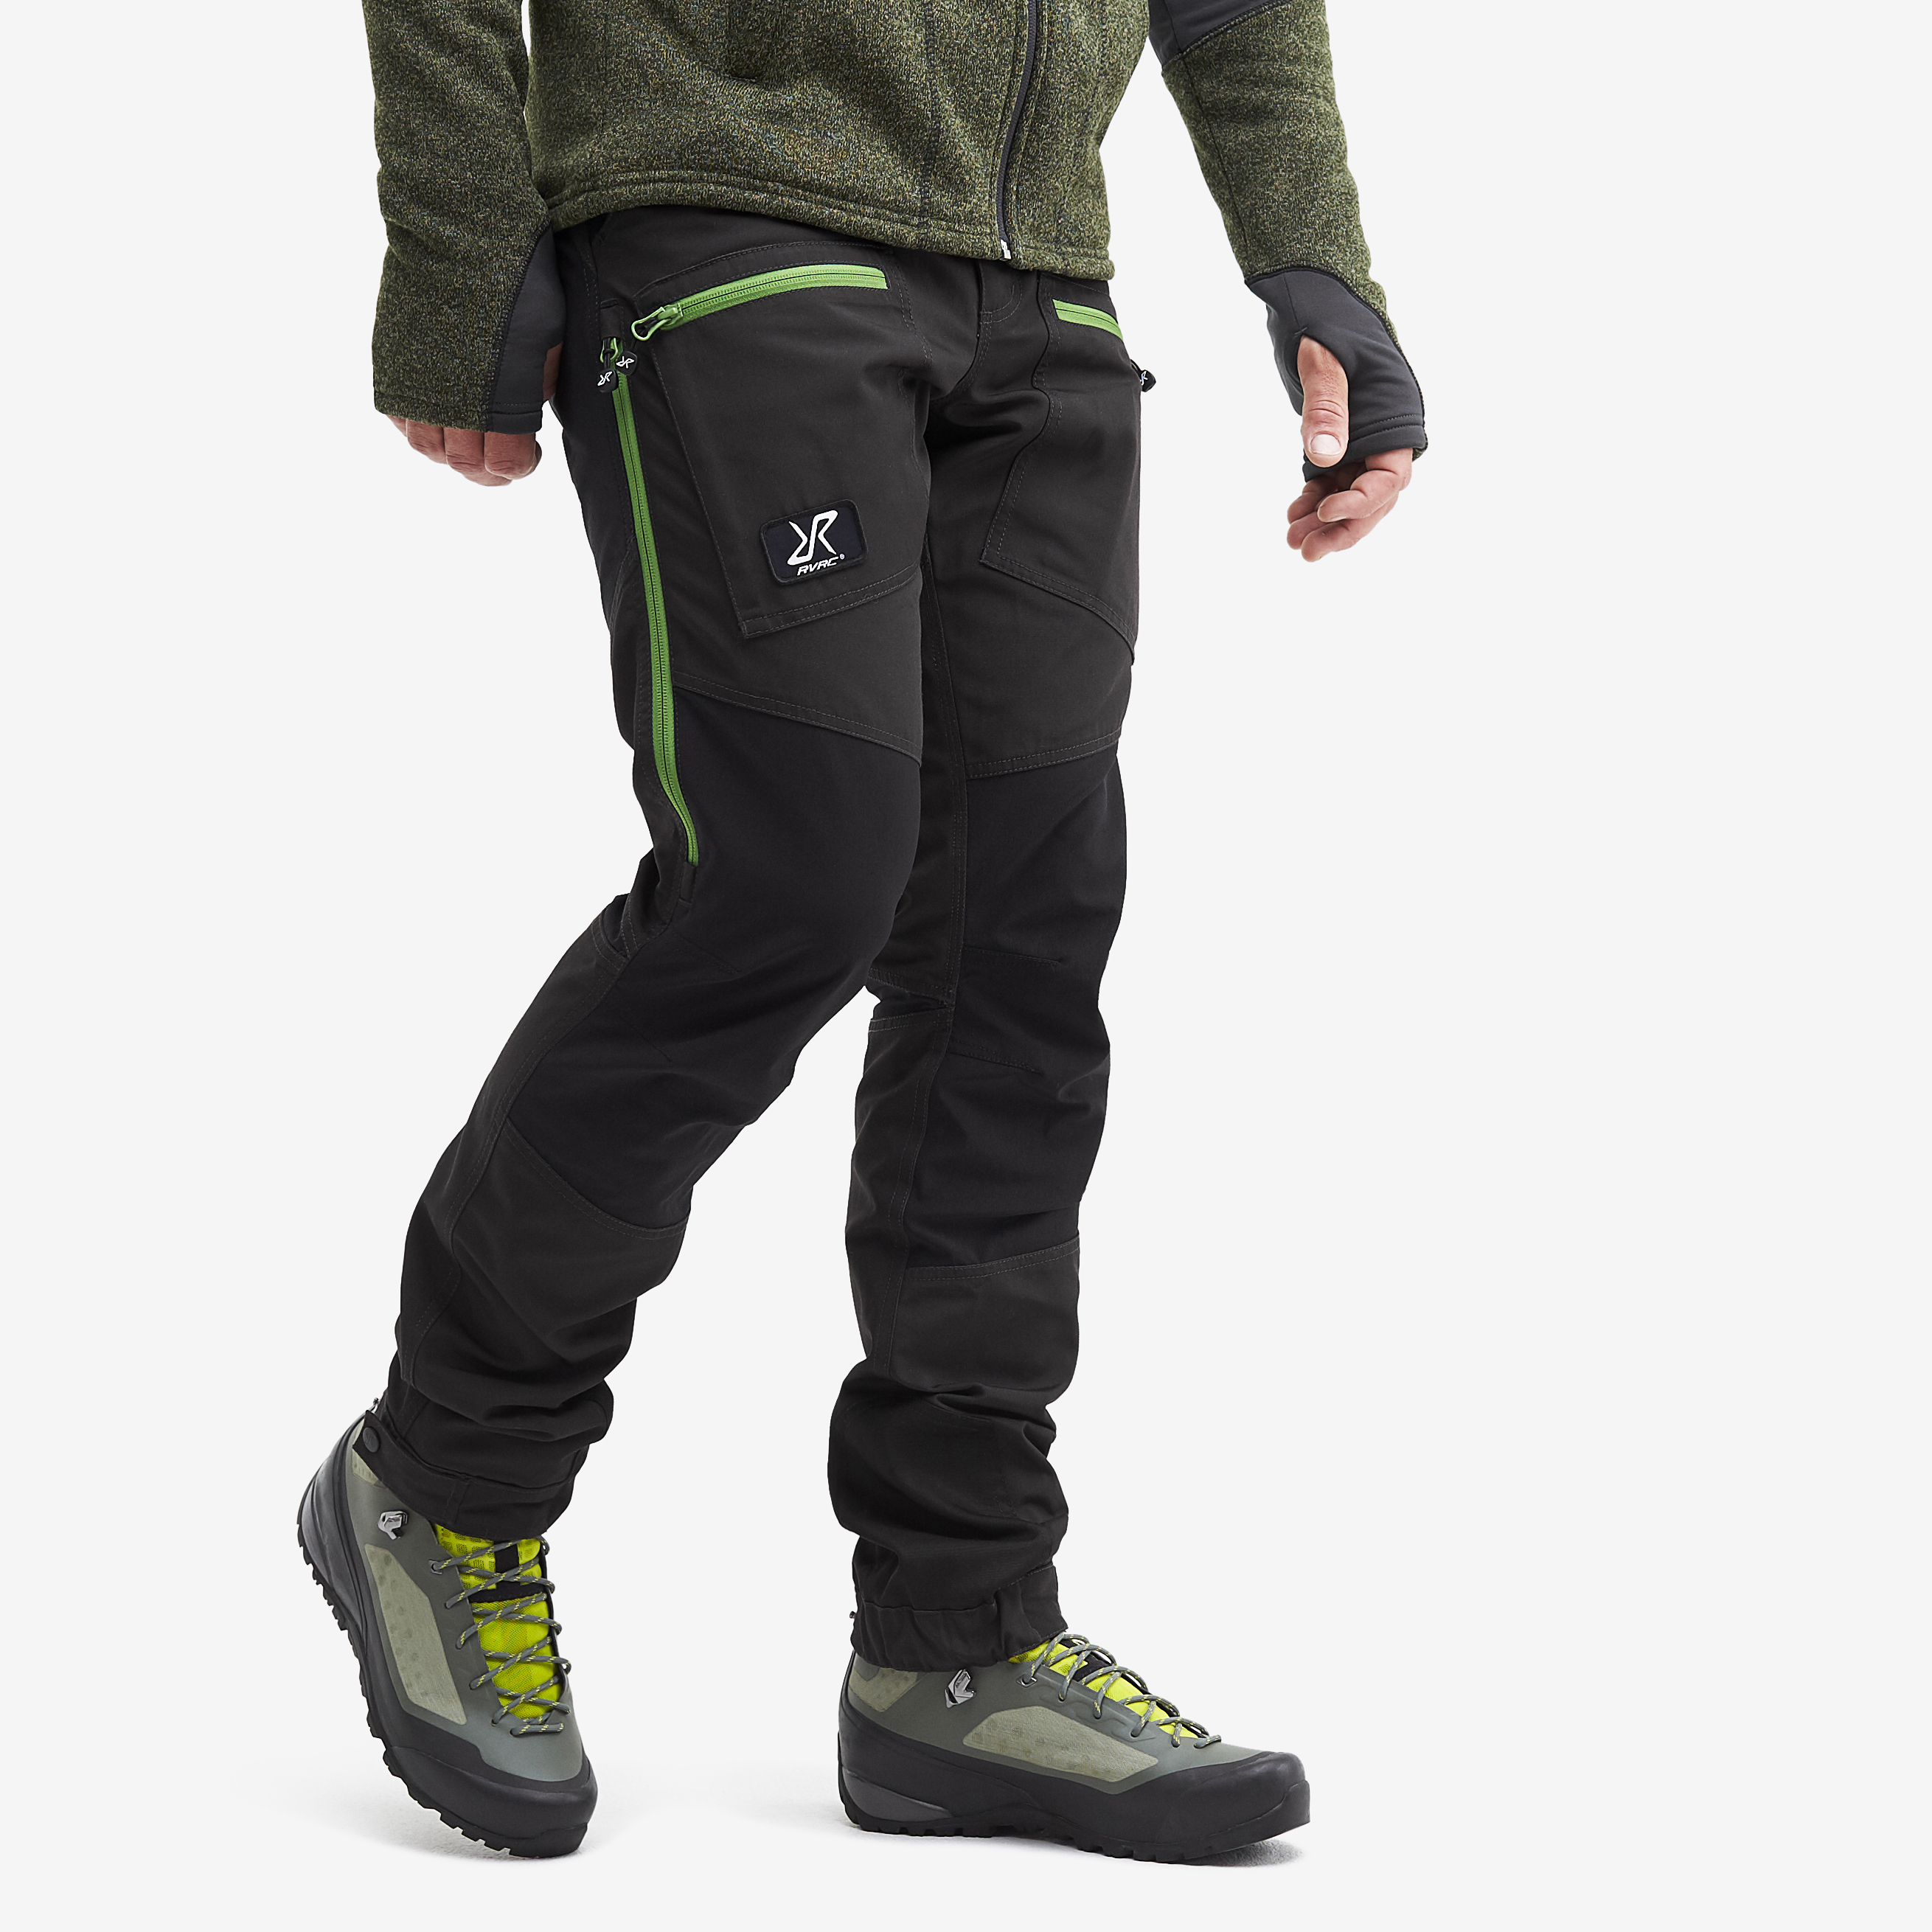 Nordwand Pro Pants Anthracite/Online Lime Herre